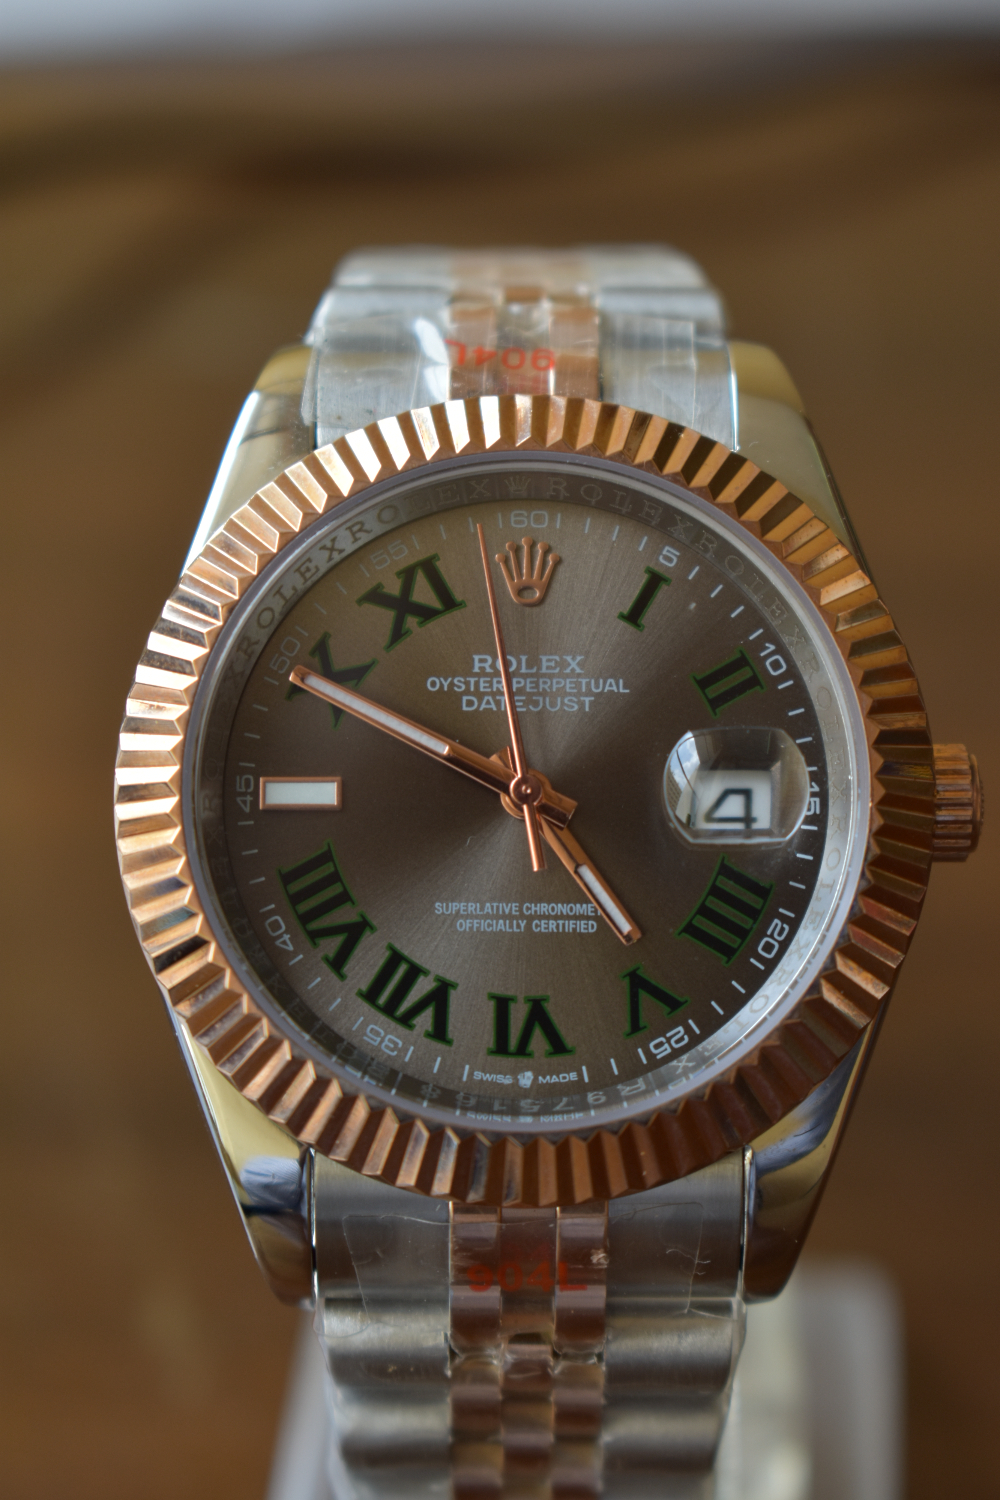 Rolex Date just 41 mm Two-Tone Stainless Steel and Rose Gold - Grey Slate Roman Wimbledon - Fluted Bezel - Jubilee Bracelet (Ref#126331) for sale in Nairobi,Kenya.